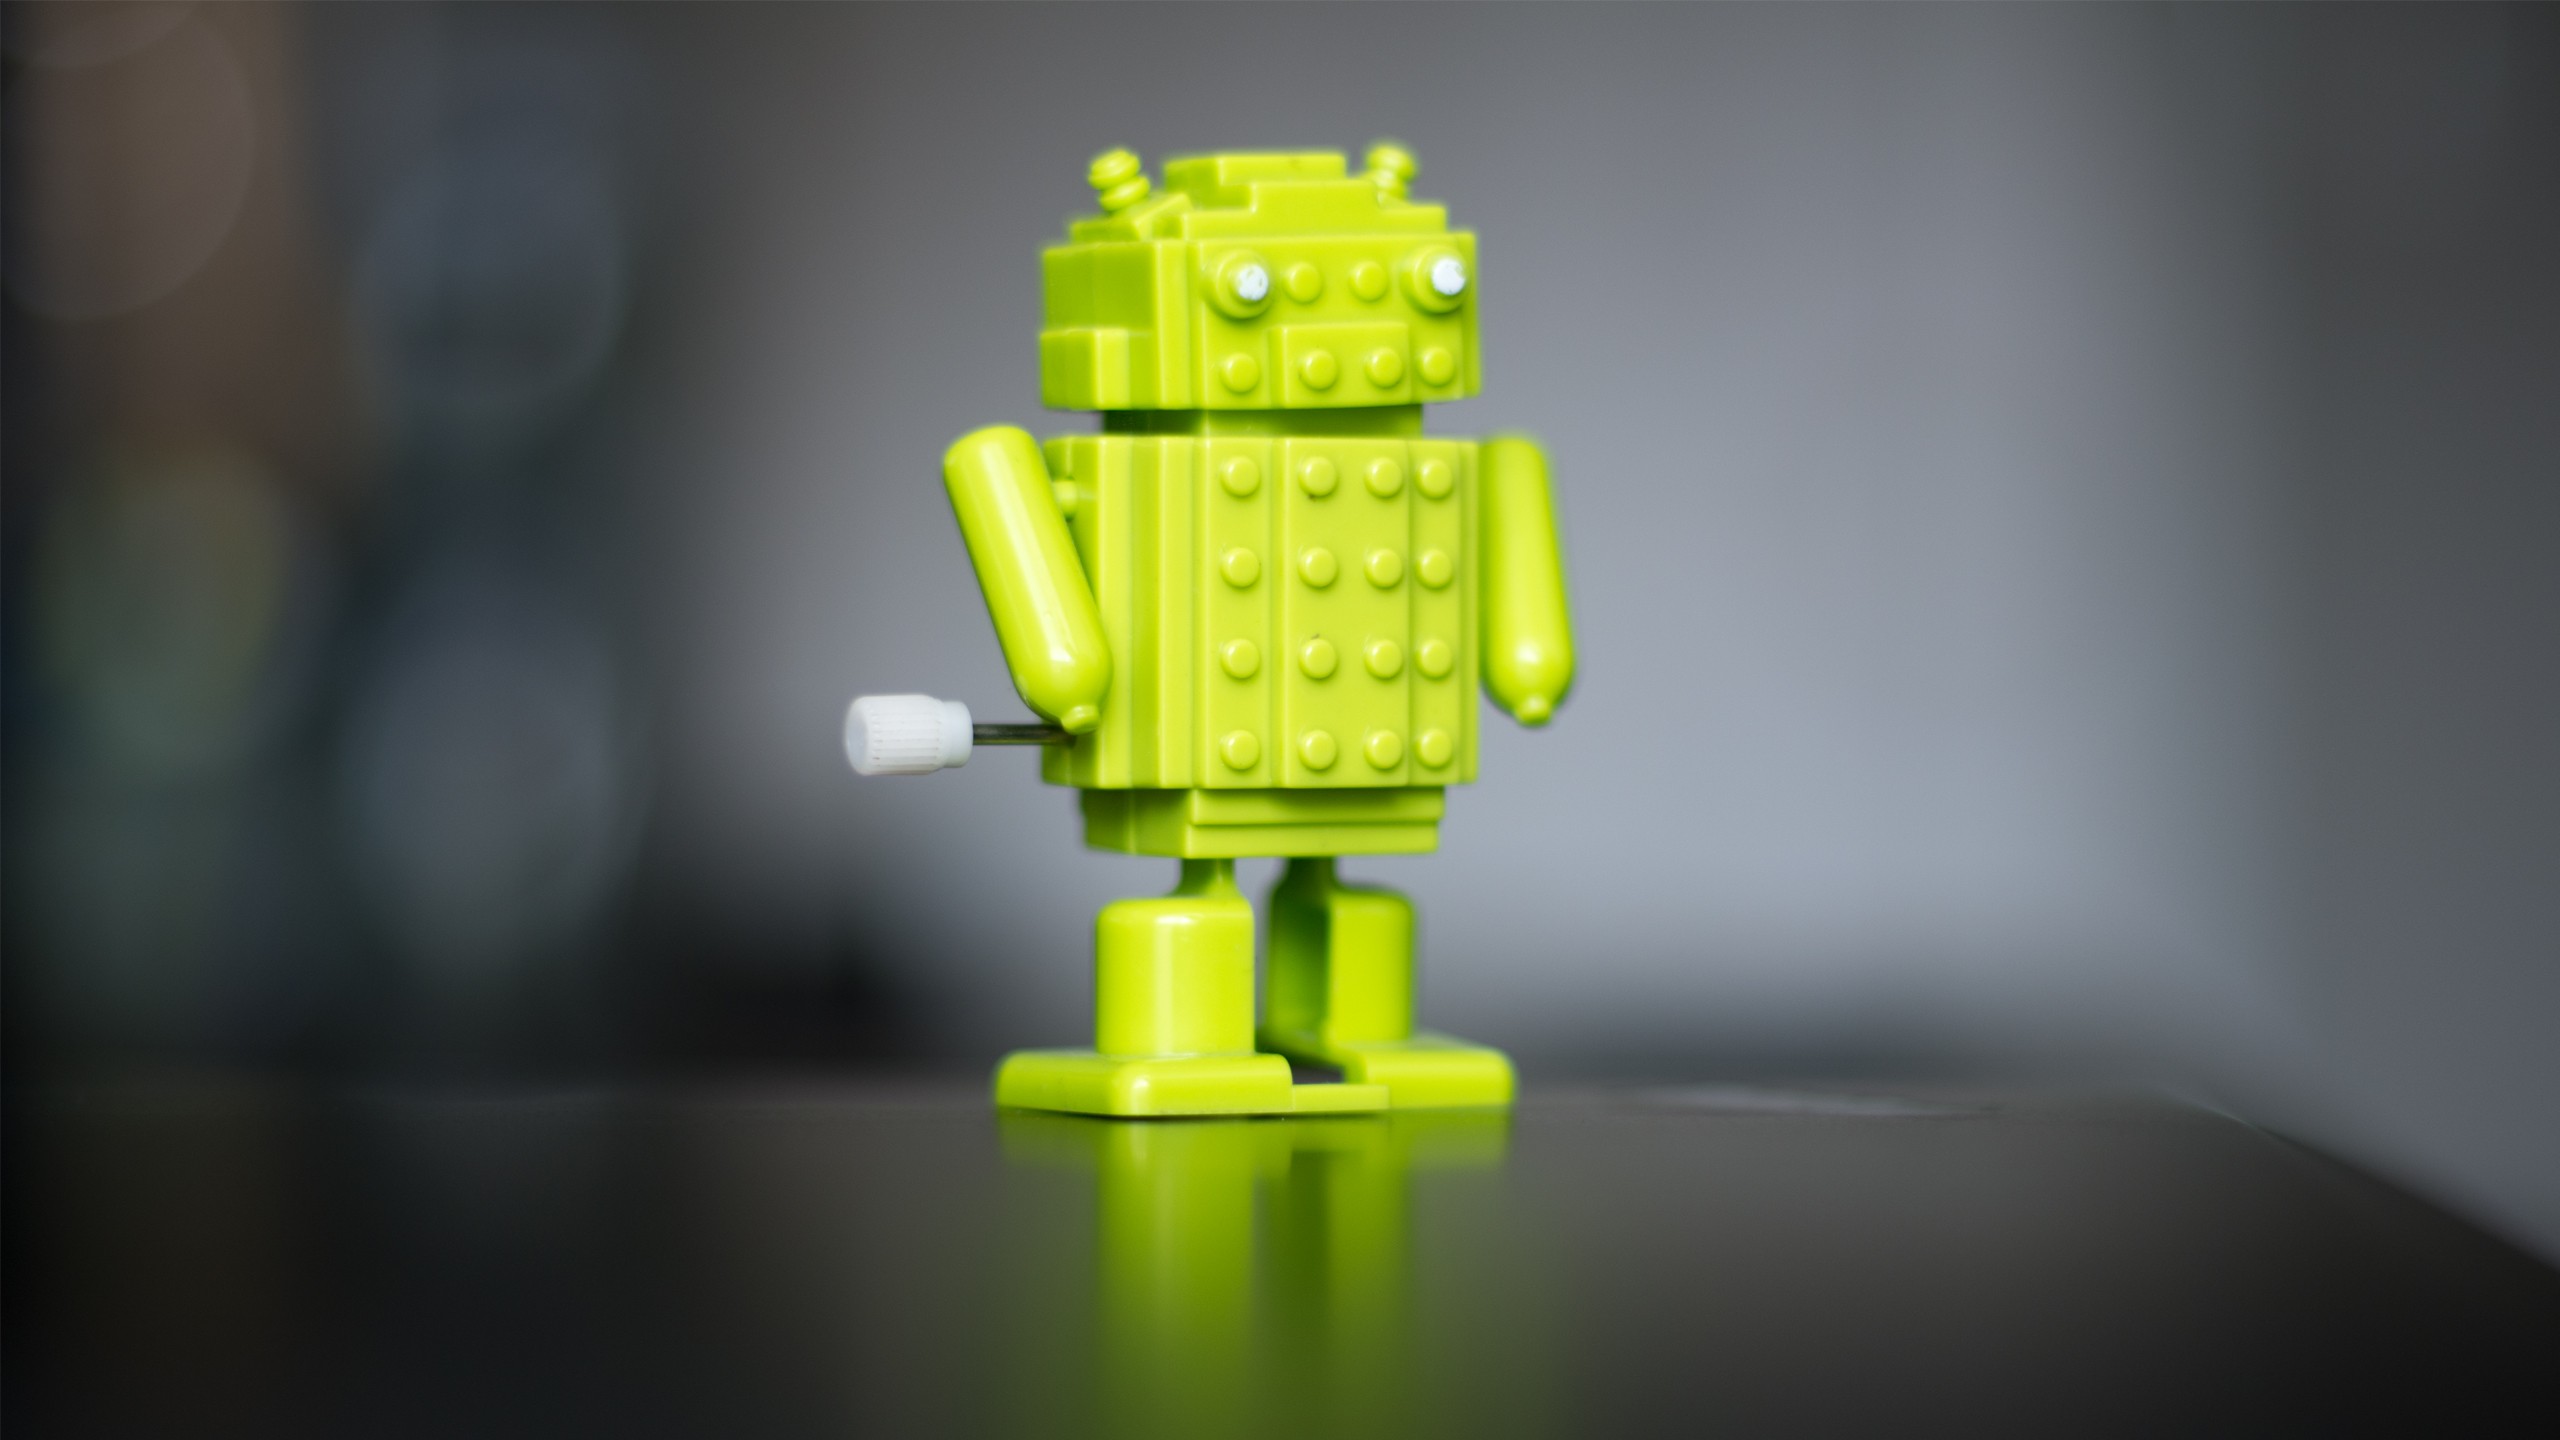 General 2560x1440 Android (operating system) robot bokeh blurred technology closeup miniatures blurry background green